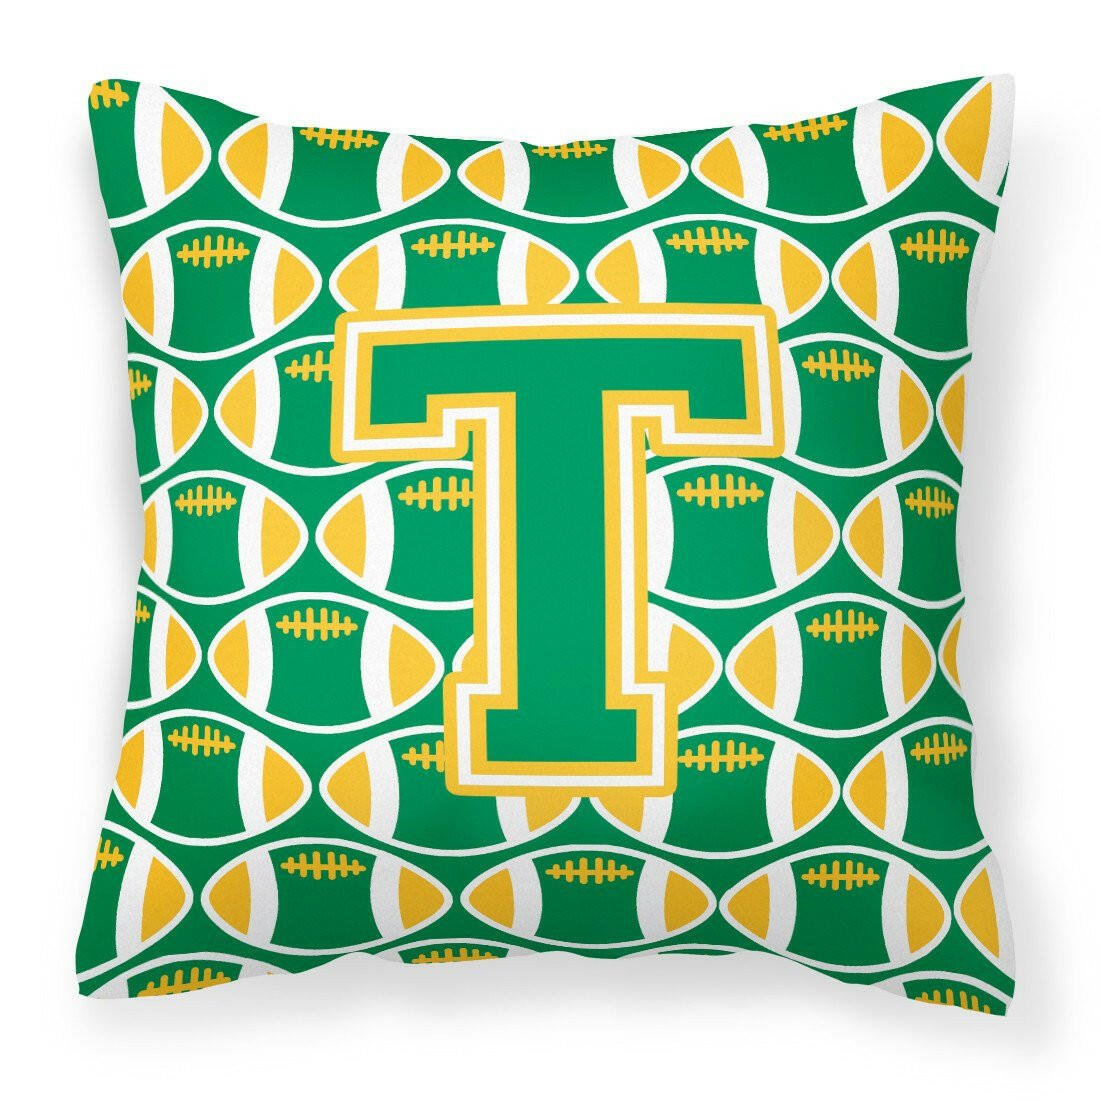 Letter T Football Green and Gold Fabric Decorative Pillow CJ1069-TPW1414 by Caroline's Treasures